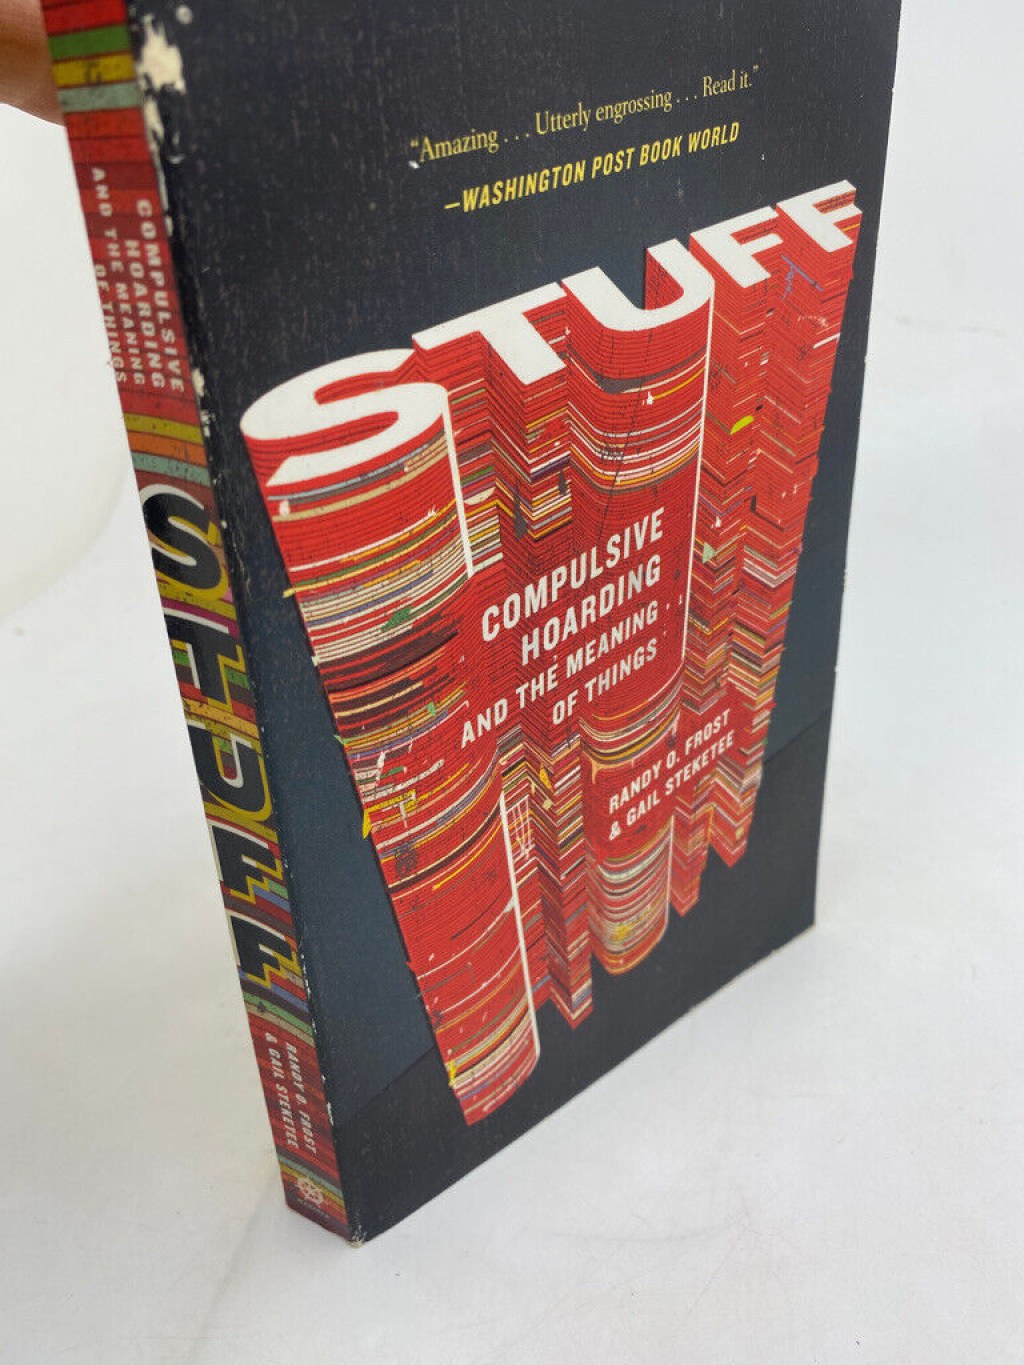 Picture of: Stuff : Compulsive Hoarding and the Meaning of Things by Frost   Paperback